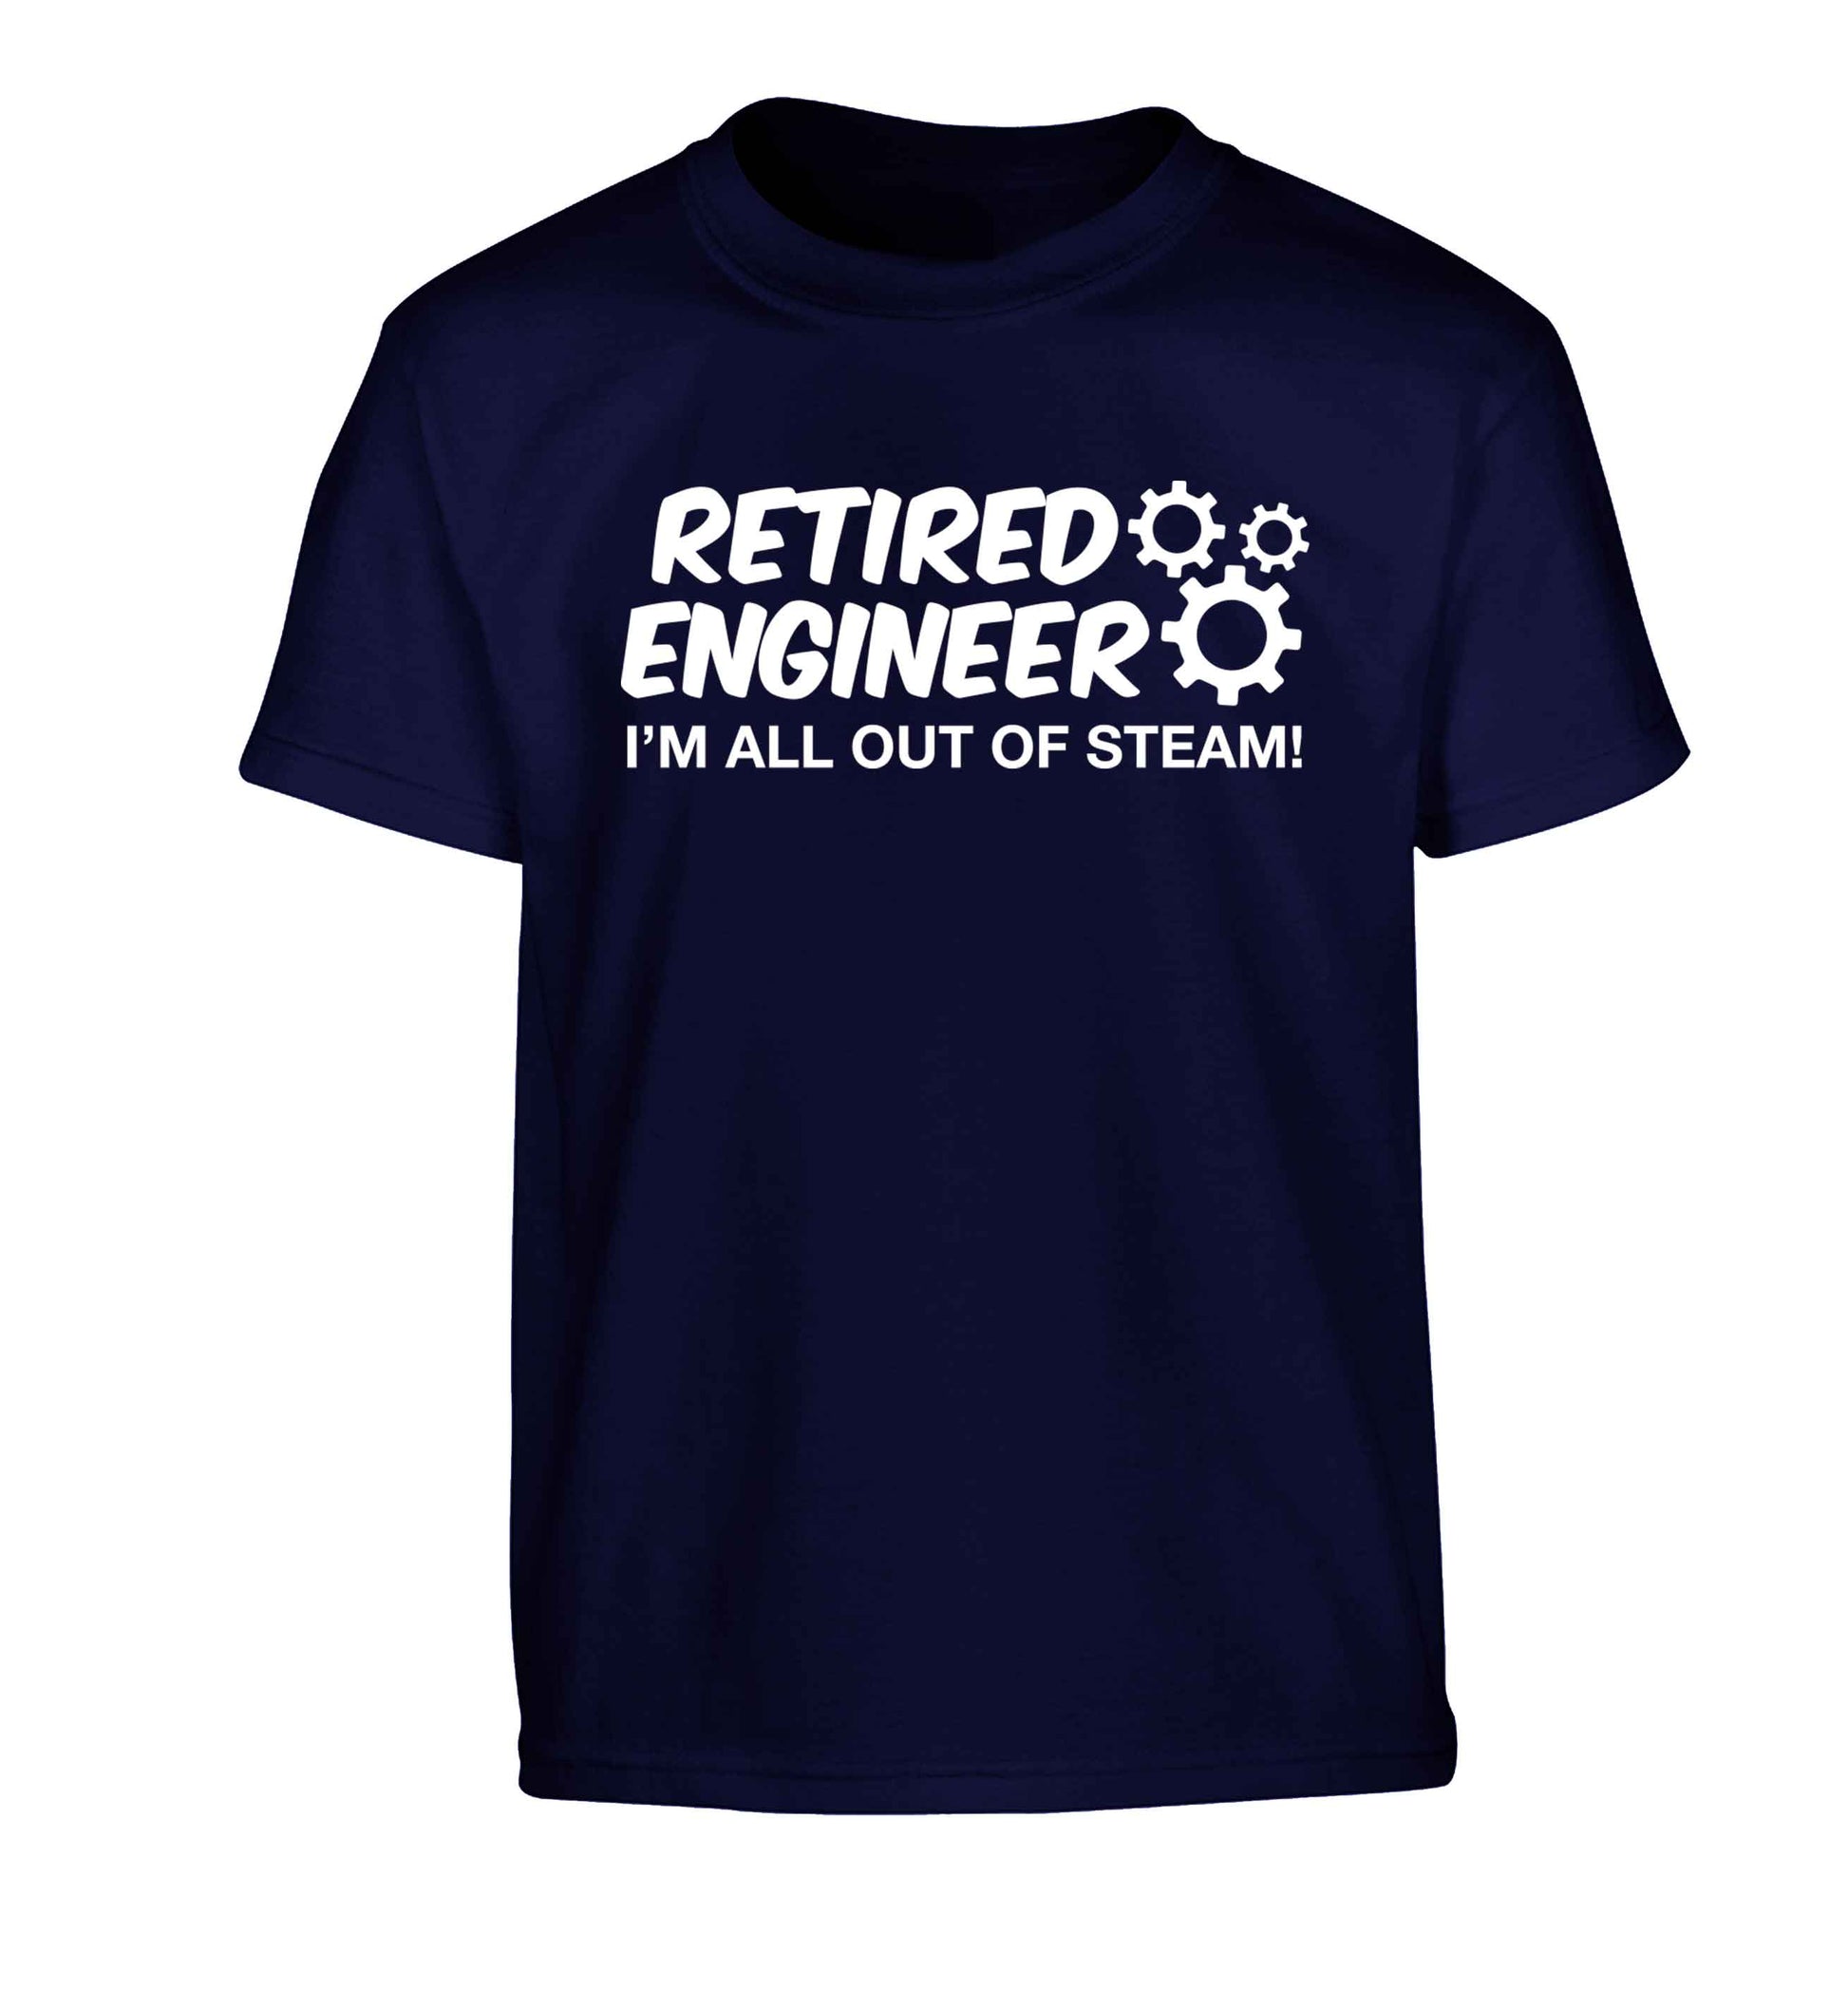 Retired engineer I'm all out of steam Children's navy Tshirt 12-13 Years